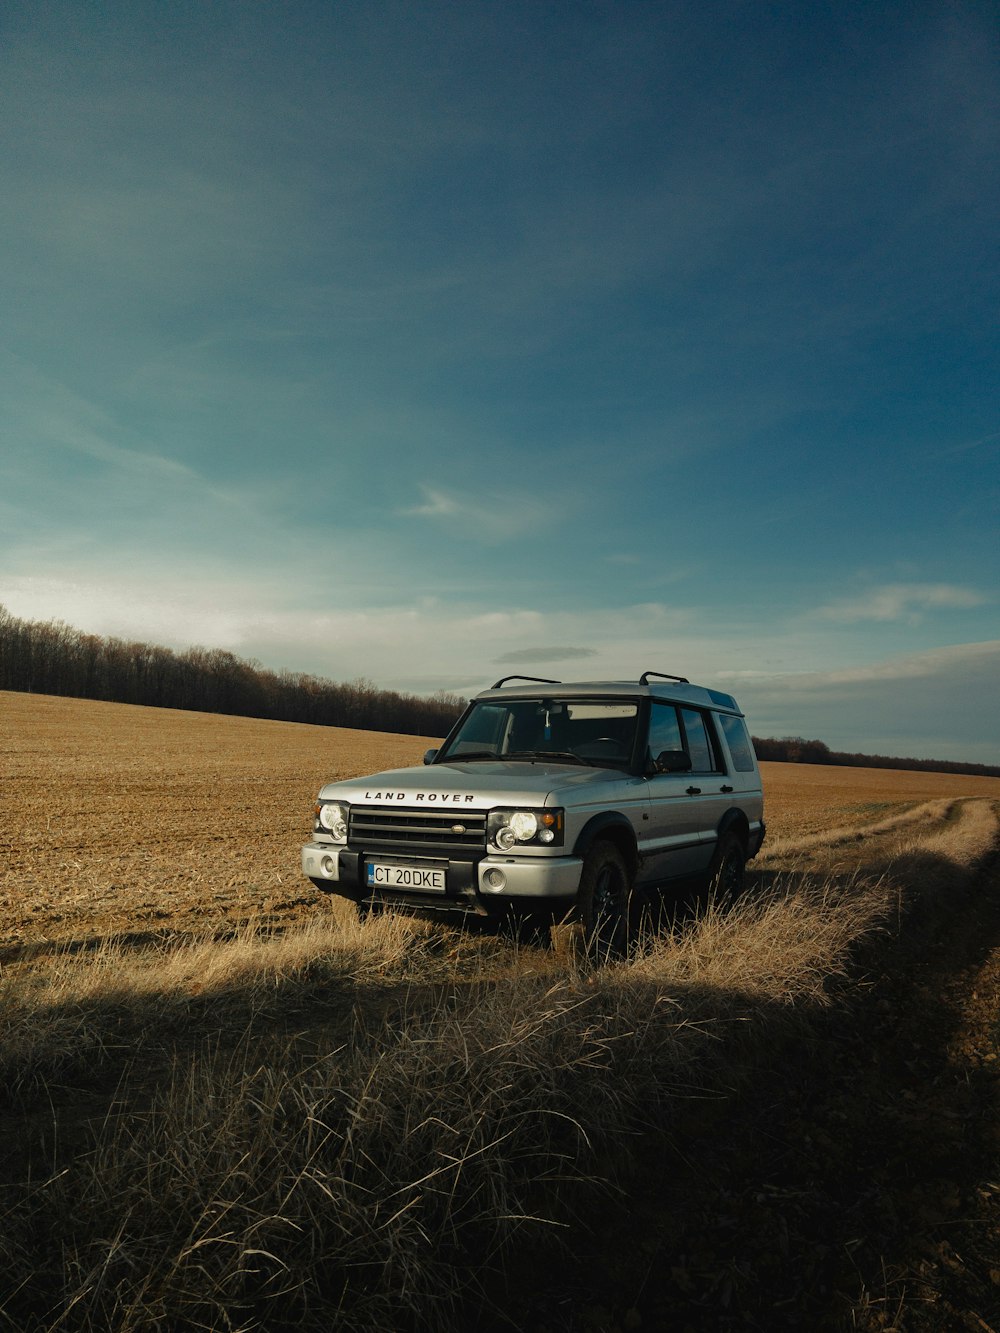 a land rover is parked in a field